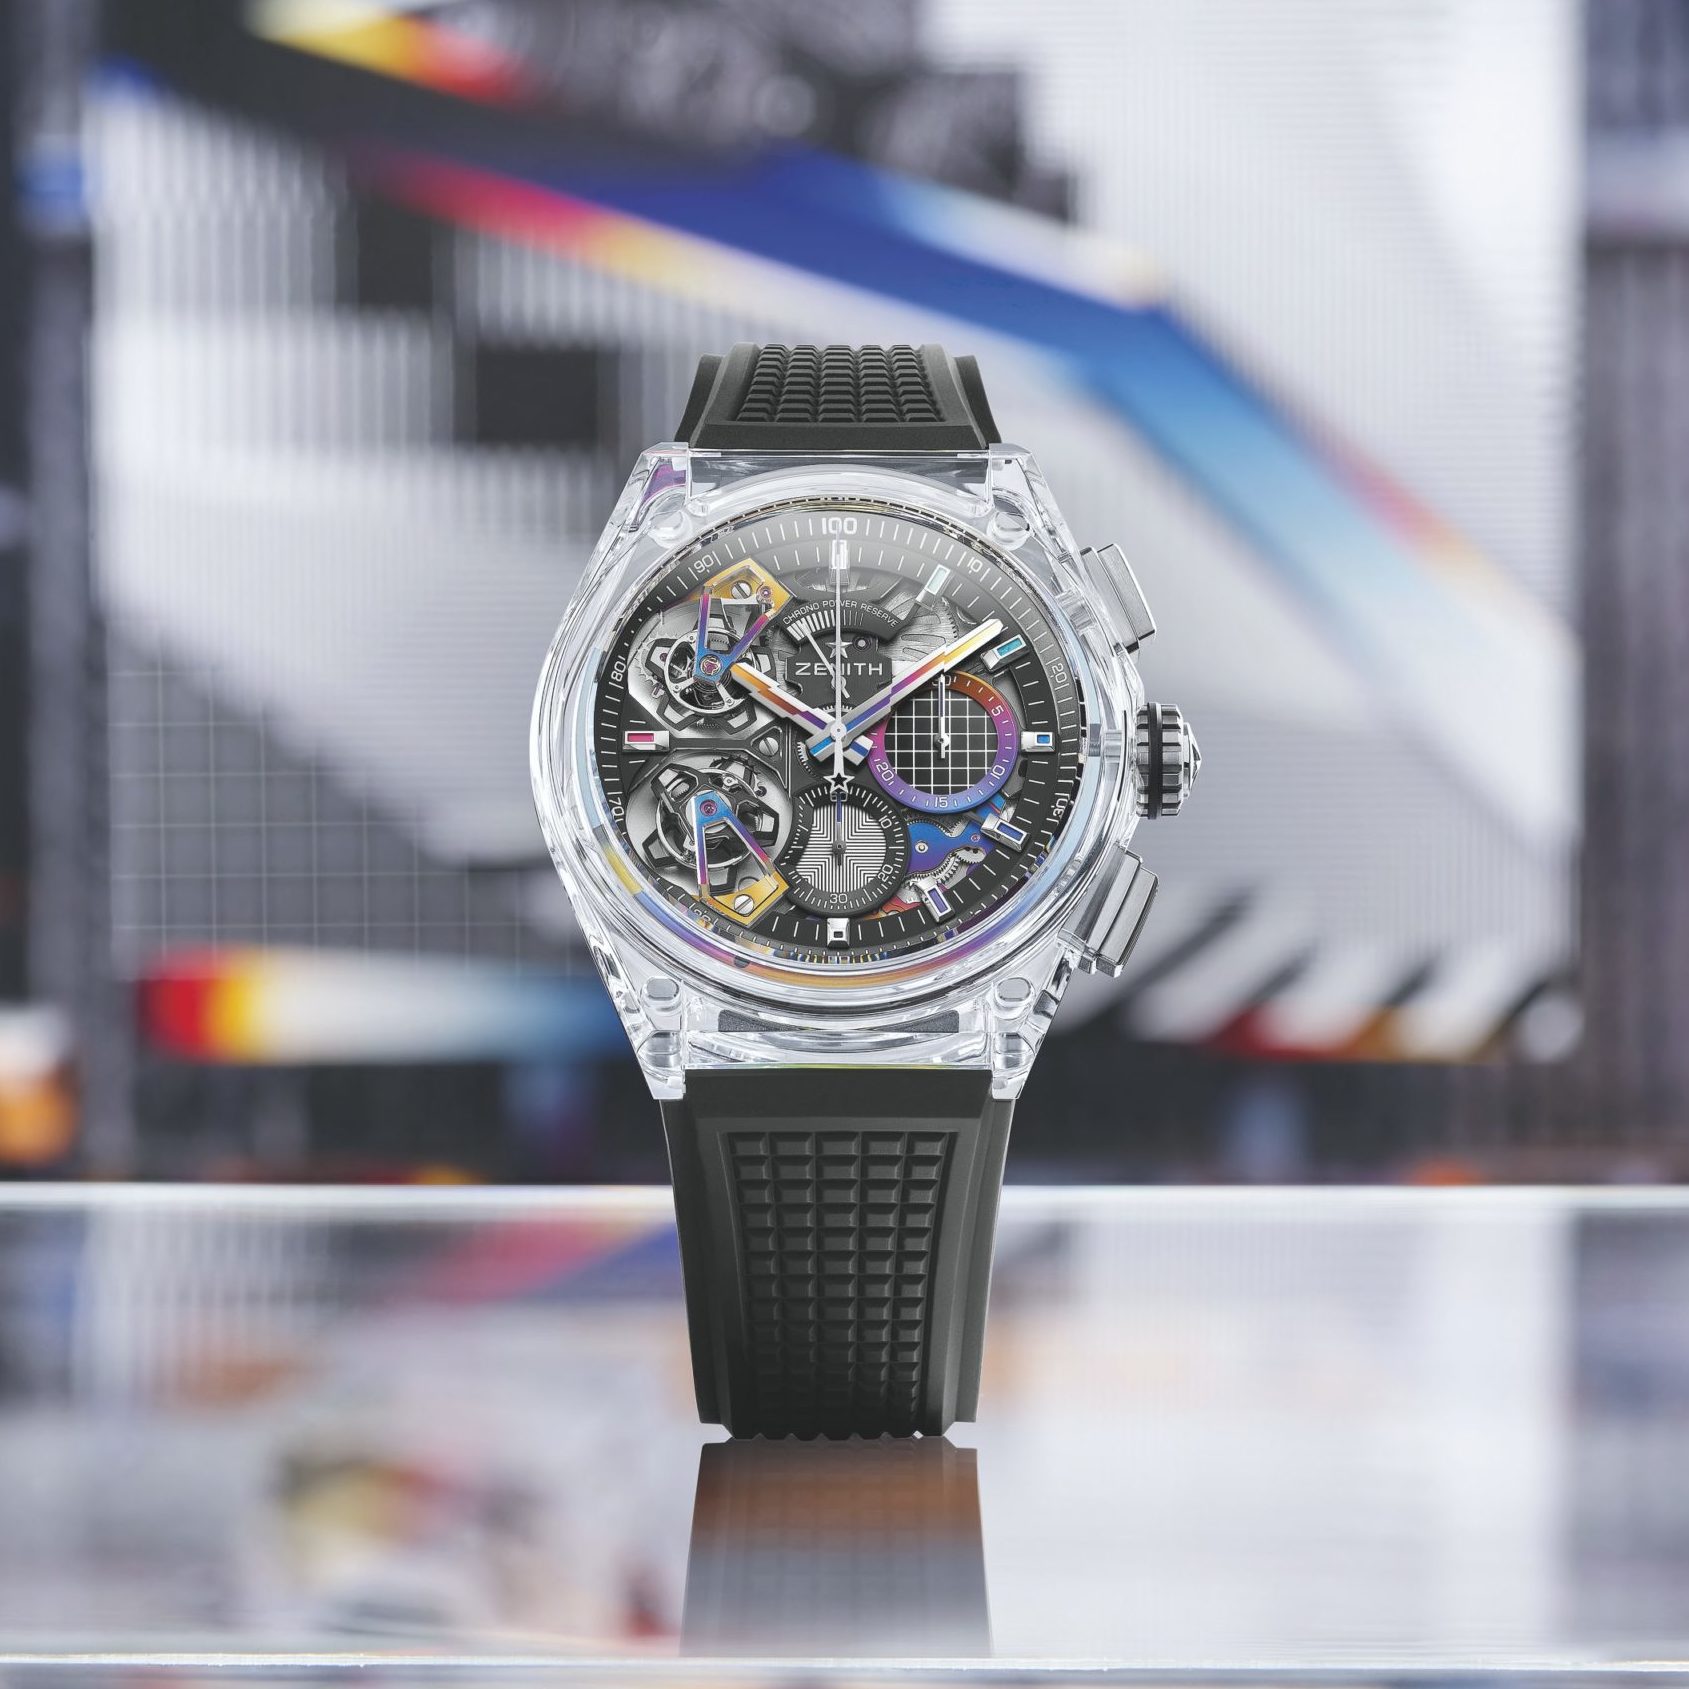 Audemars Piguet, FPJ, H. Moser & Cie, and Zenith achieve record breaking results at Only Watch 2021